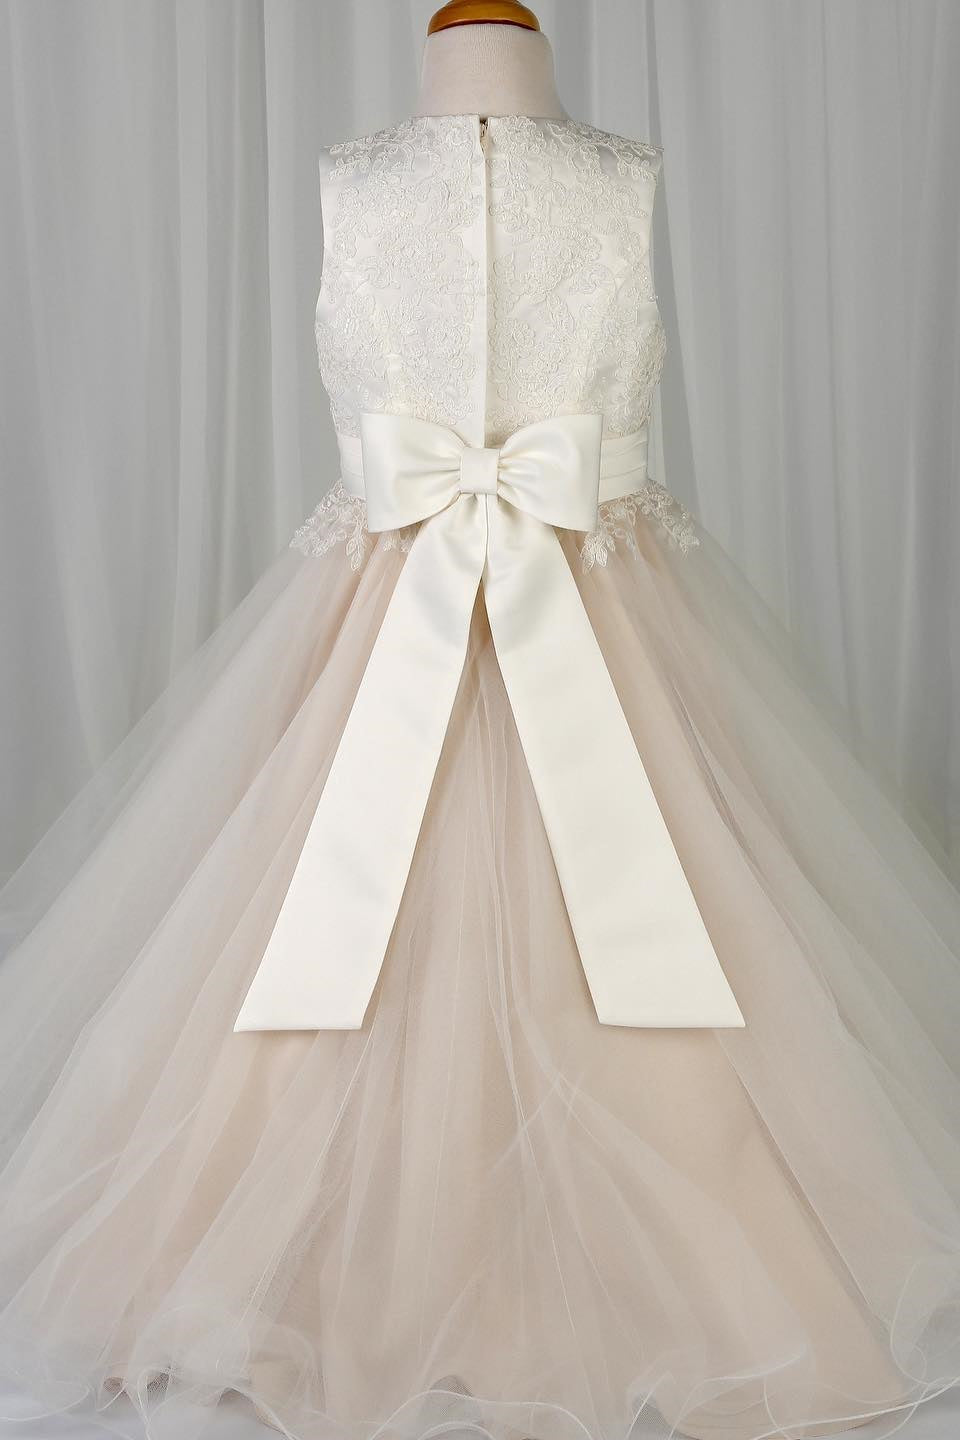 Blush Pink Sleeveless Appliques Long Flower Girl Dress with Bow Tie back Sash